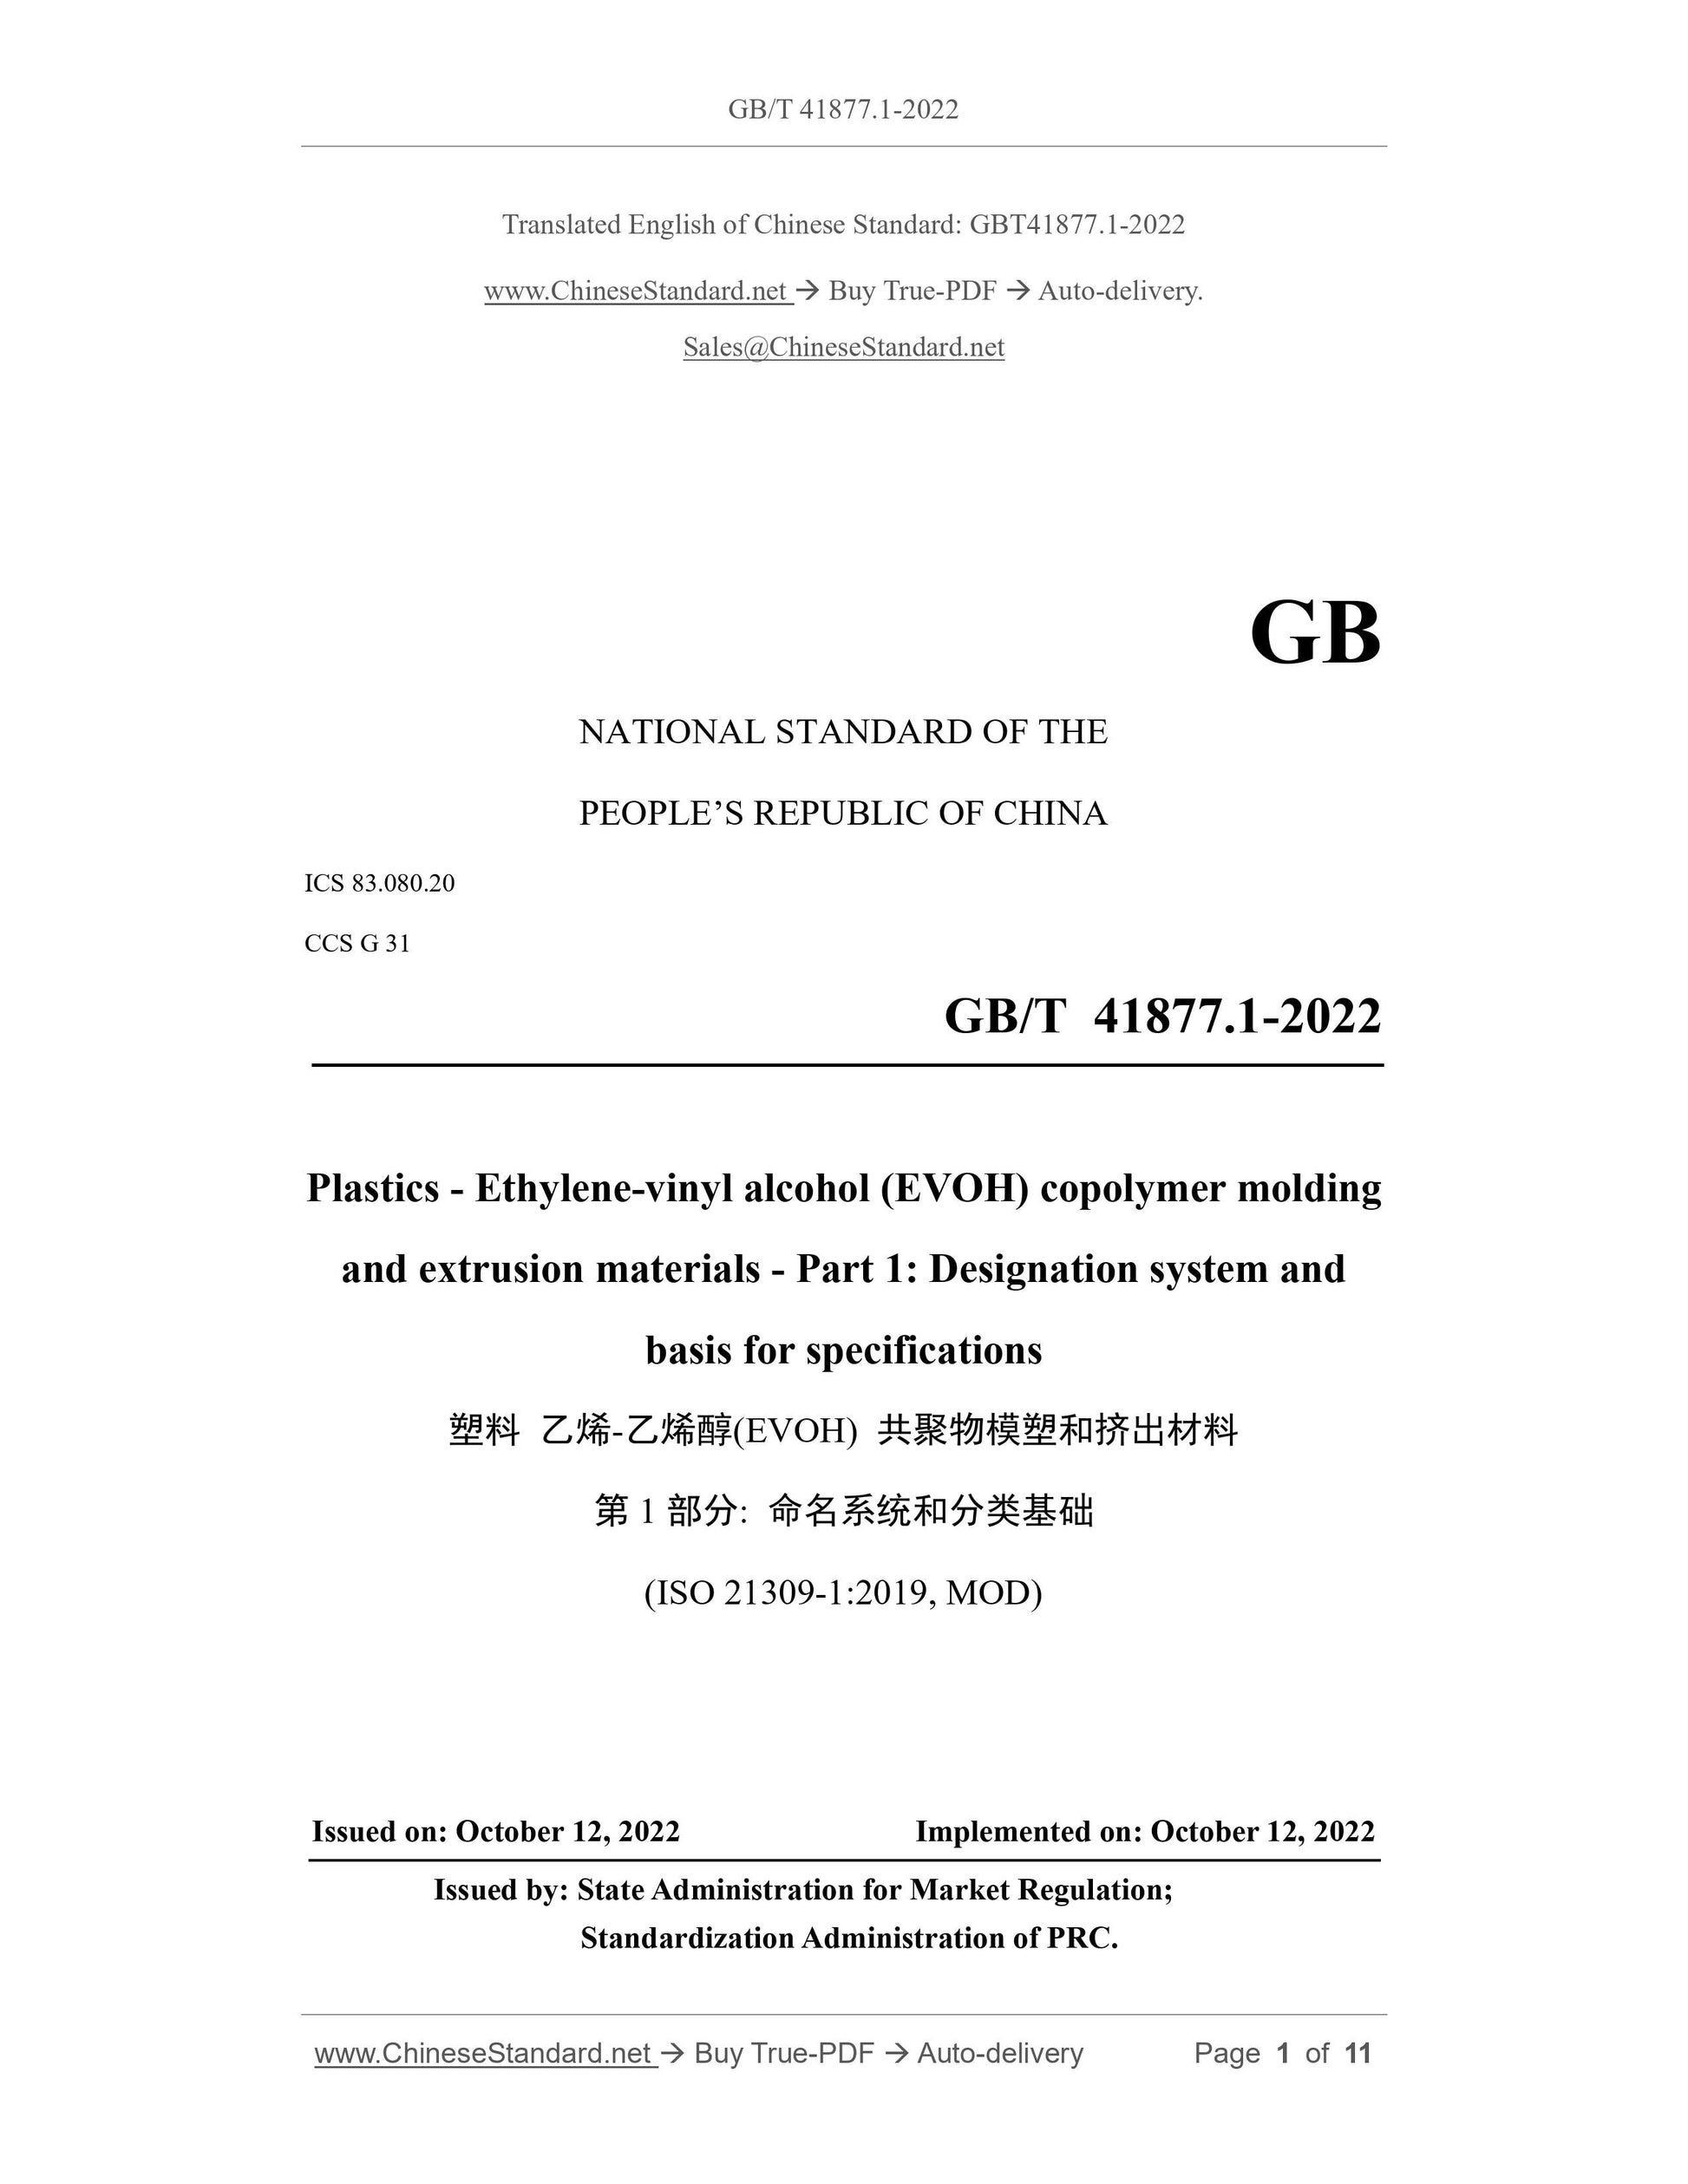 GB/T 41877.1-2022 Page 1